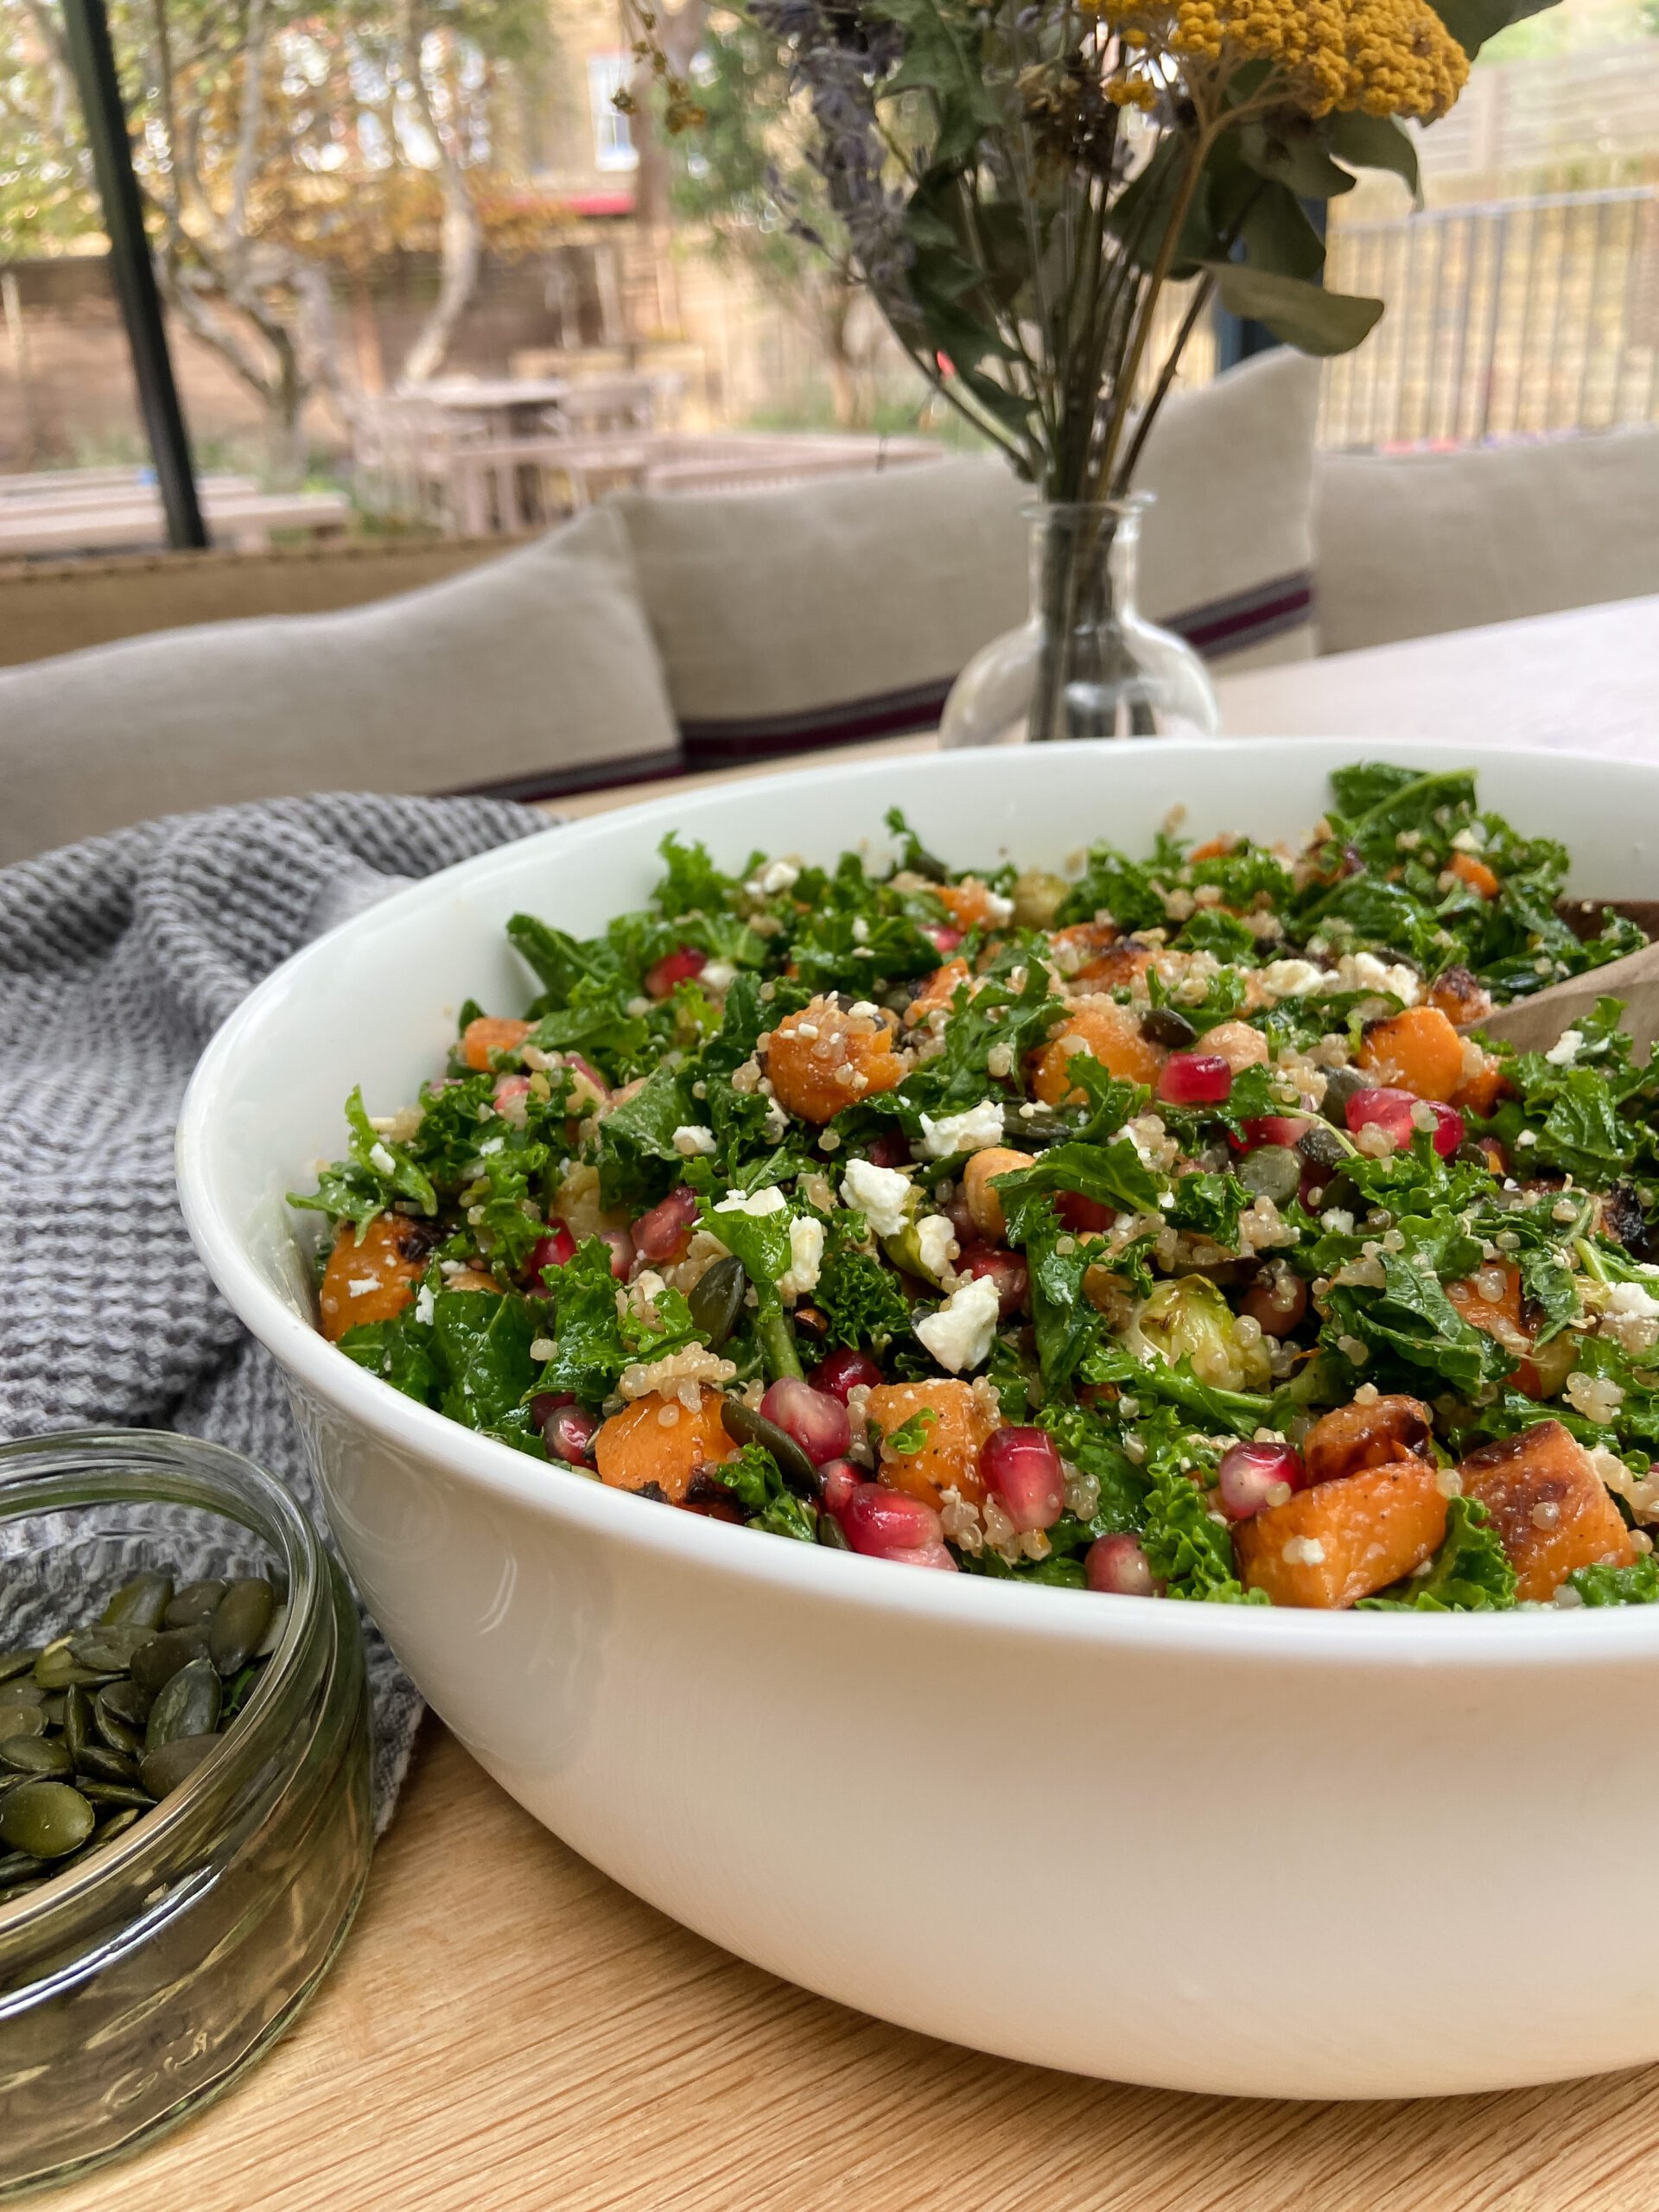 Oven Roasted Butternut Squash and Brussel Sprout Salad with Quinoa and Kale